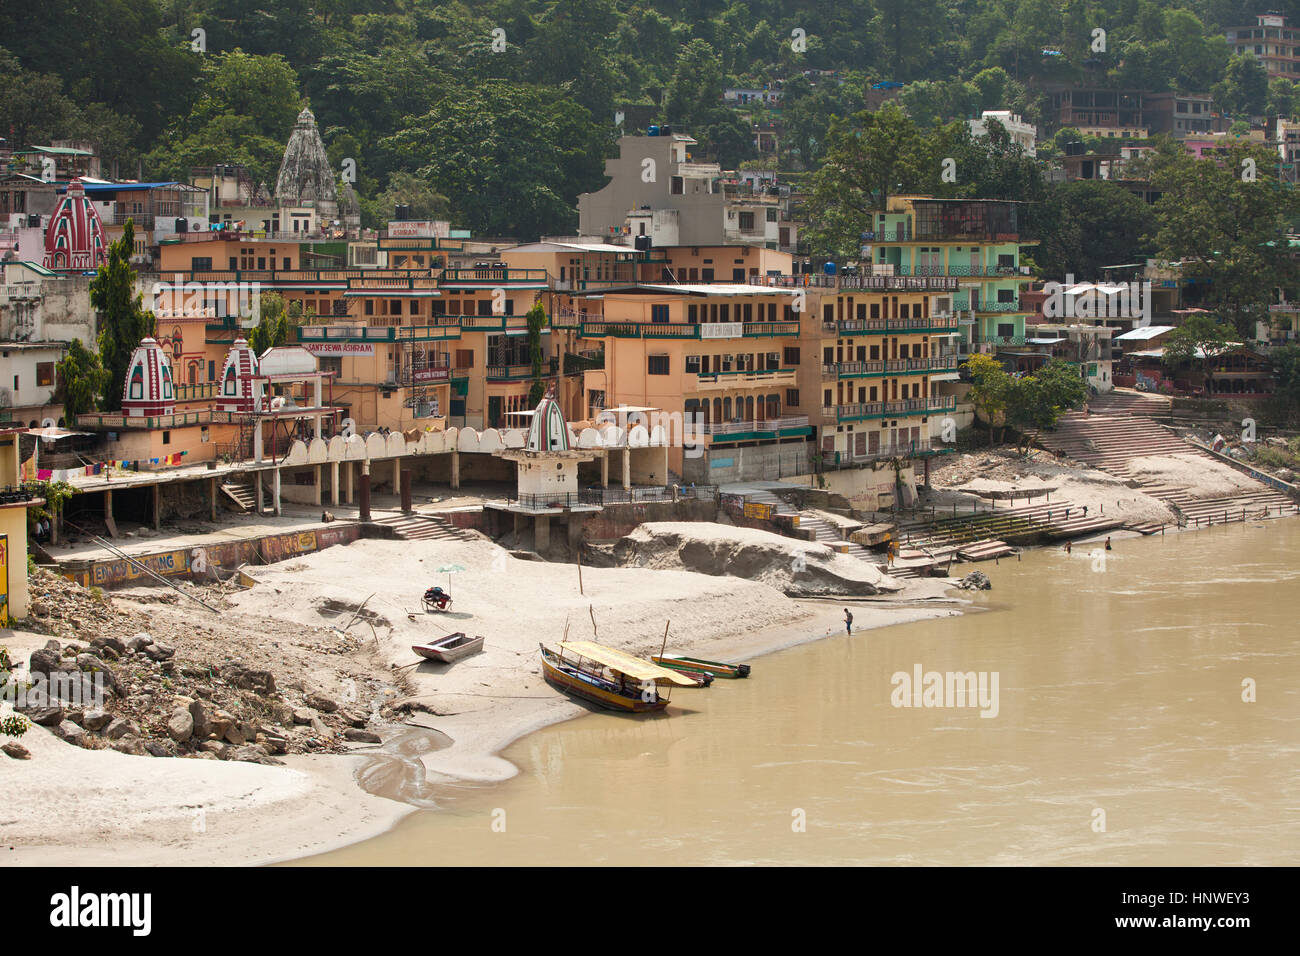 Rishikesh, India - 24 September 2014: Sunset view of the bank of the Ganges River near Lakshman Jhula in Rishikesh, India on 24 September 2014. Stock Photo